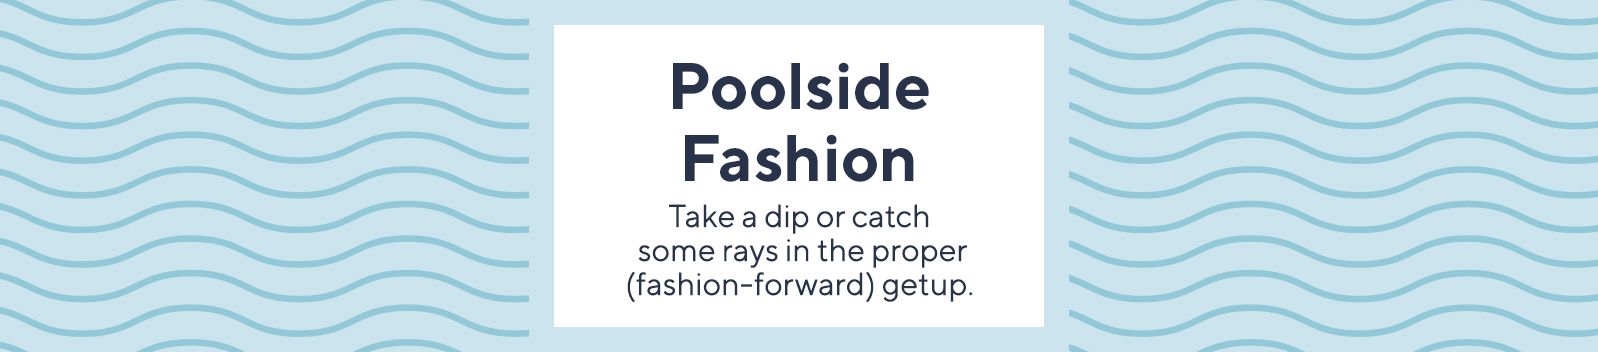 Poolside Fashion  Take a dip or catch some rays in the proper (fashion-forward) getup.